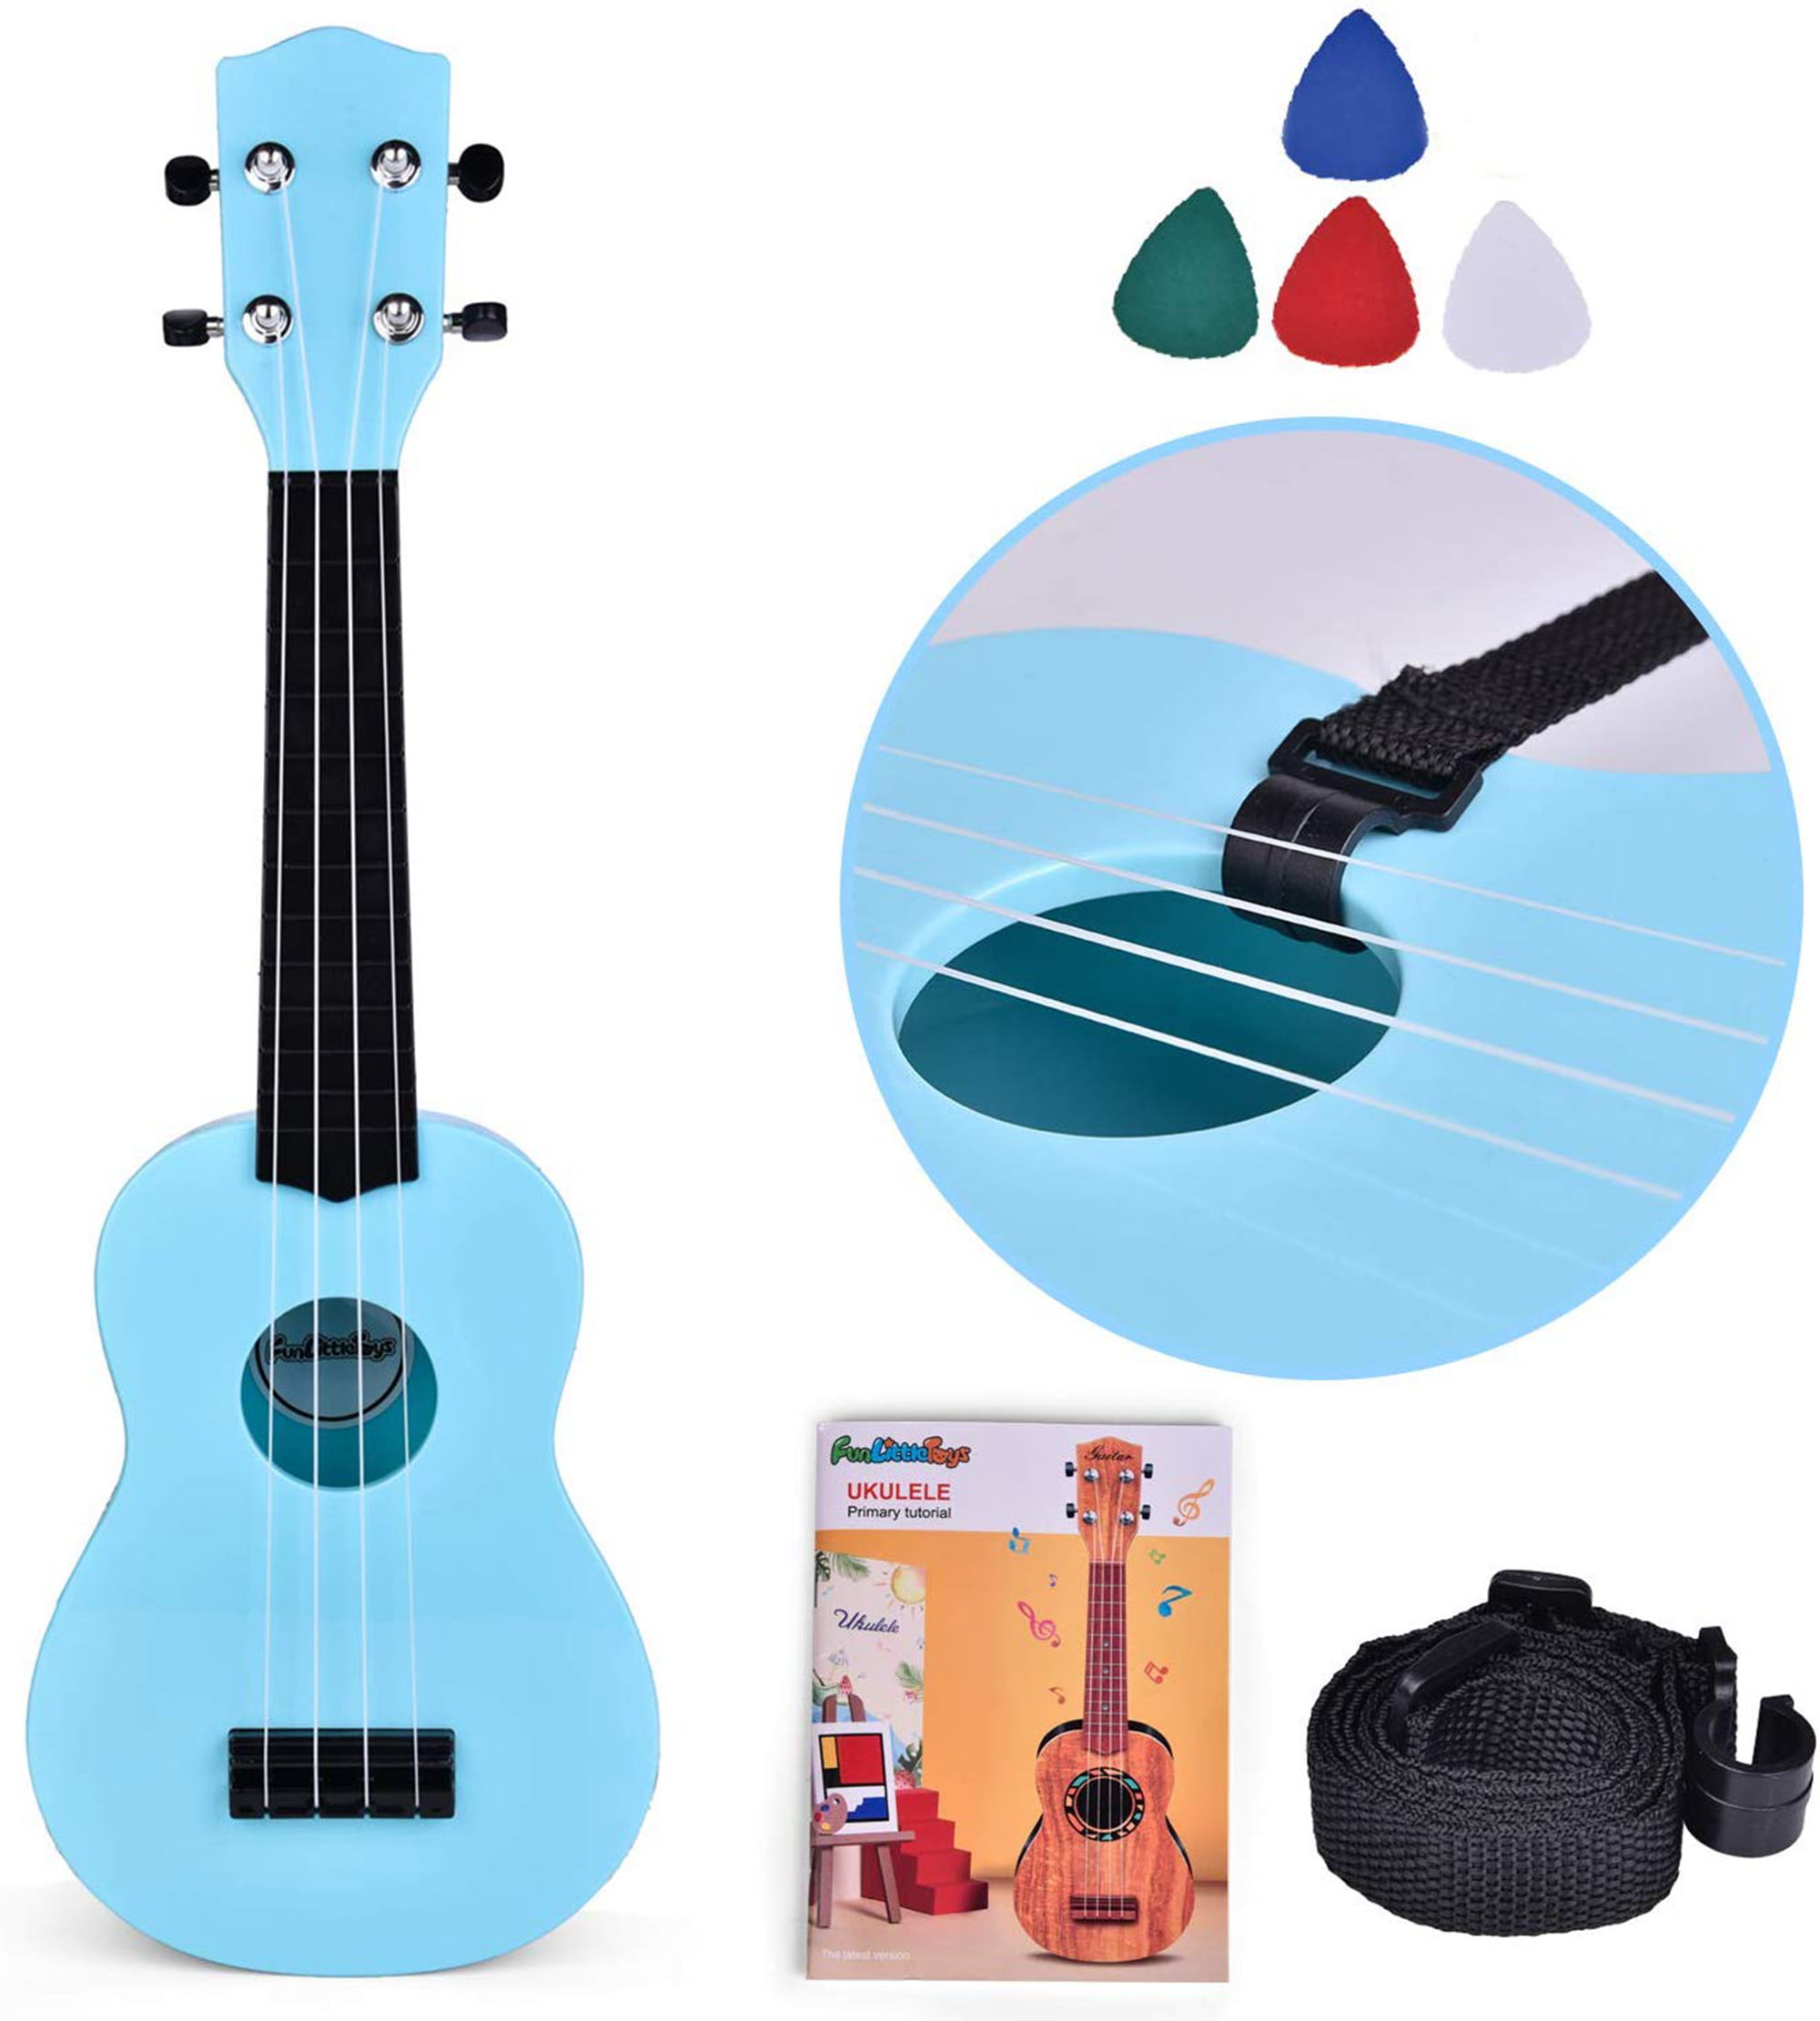 Kids Guitar 21 Inches Ukulele Toy Musical Instruments Beginner Educational Gift 